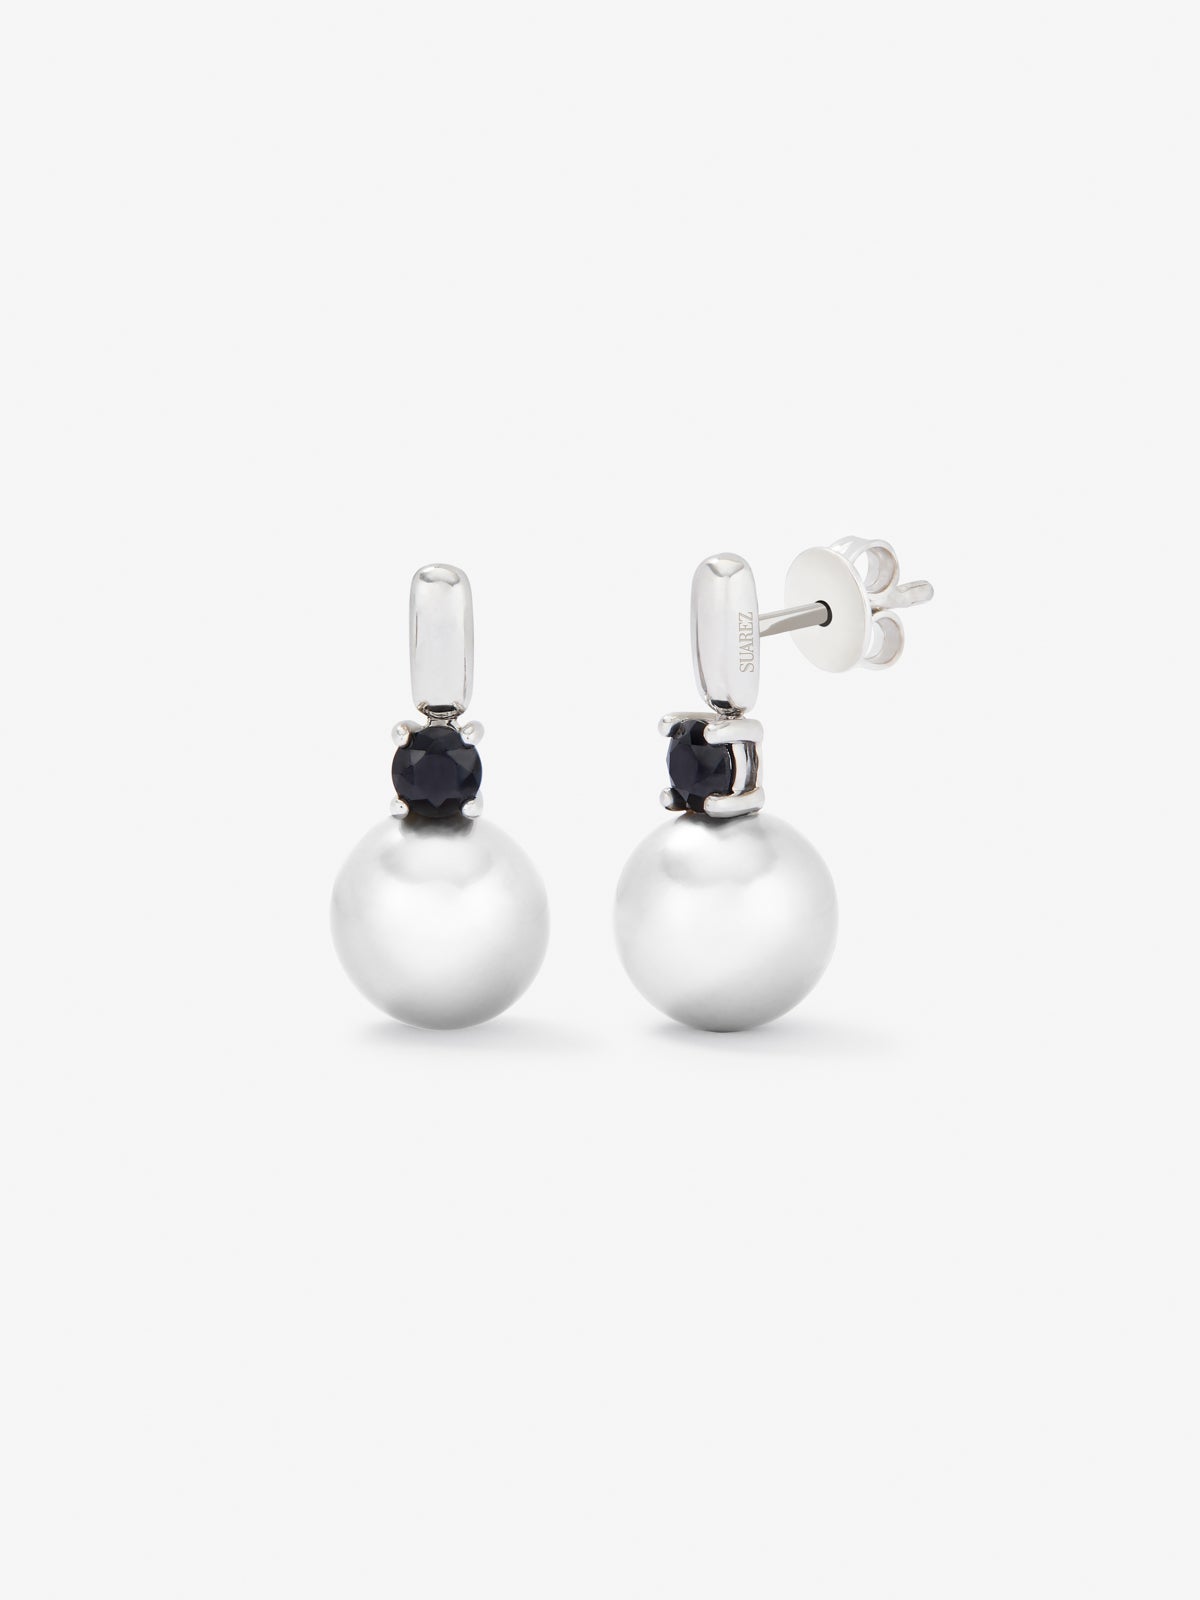 925 silver earrings with black spinels and 8.5mm Akoya pearls